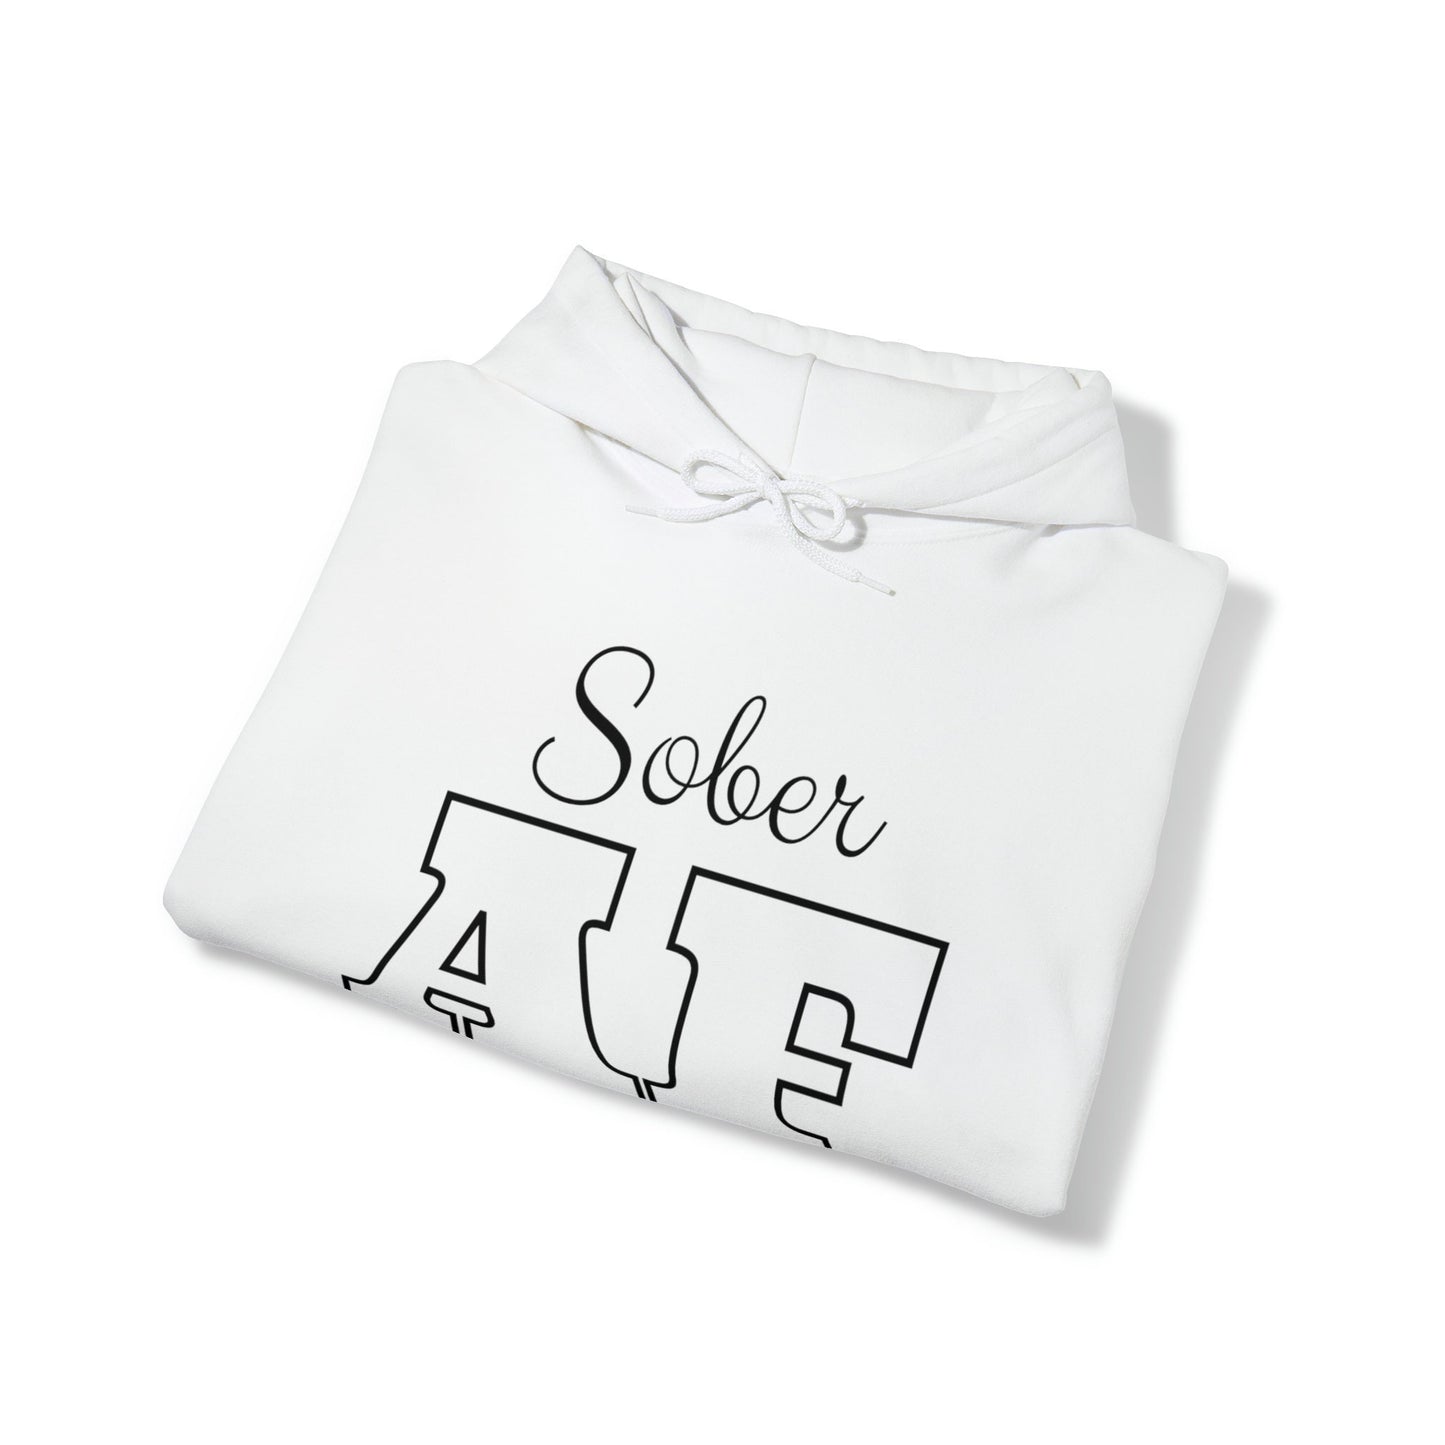 Sober AF Hoodie, Sobriety Pullover, Recovery Hooded Sweatshirt, Recovery Celebration Apparel, AA Shirts, Alcoholic Anonymous Sweatshirt - Folded View